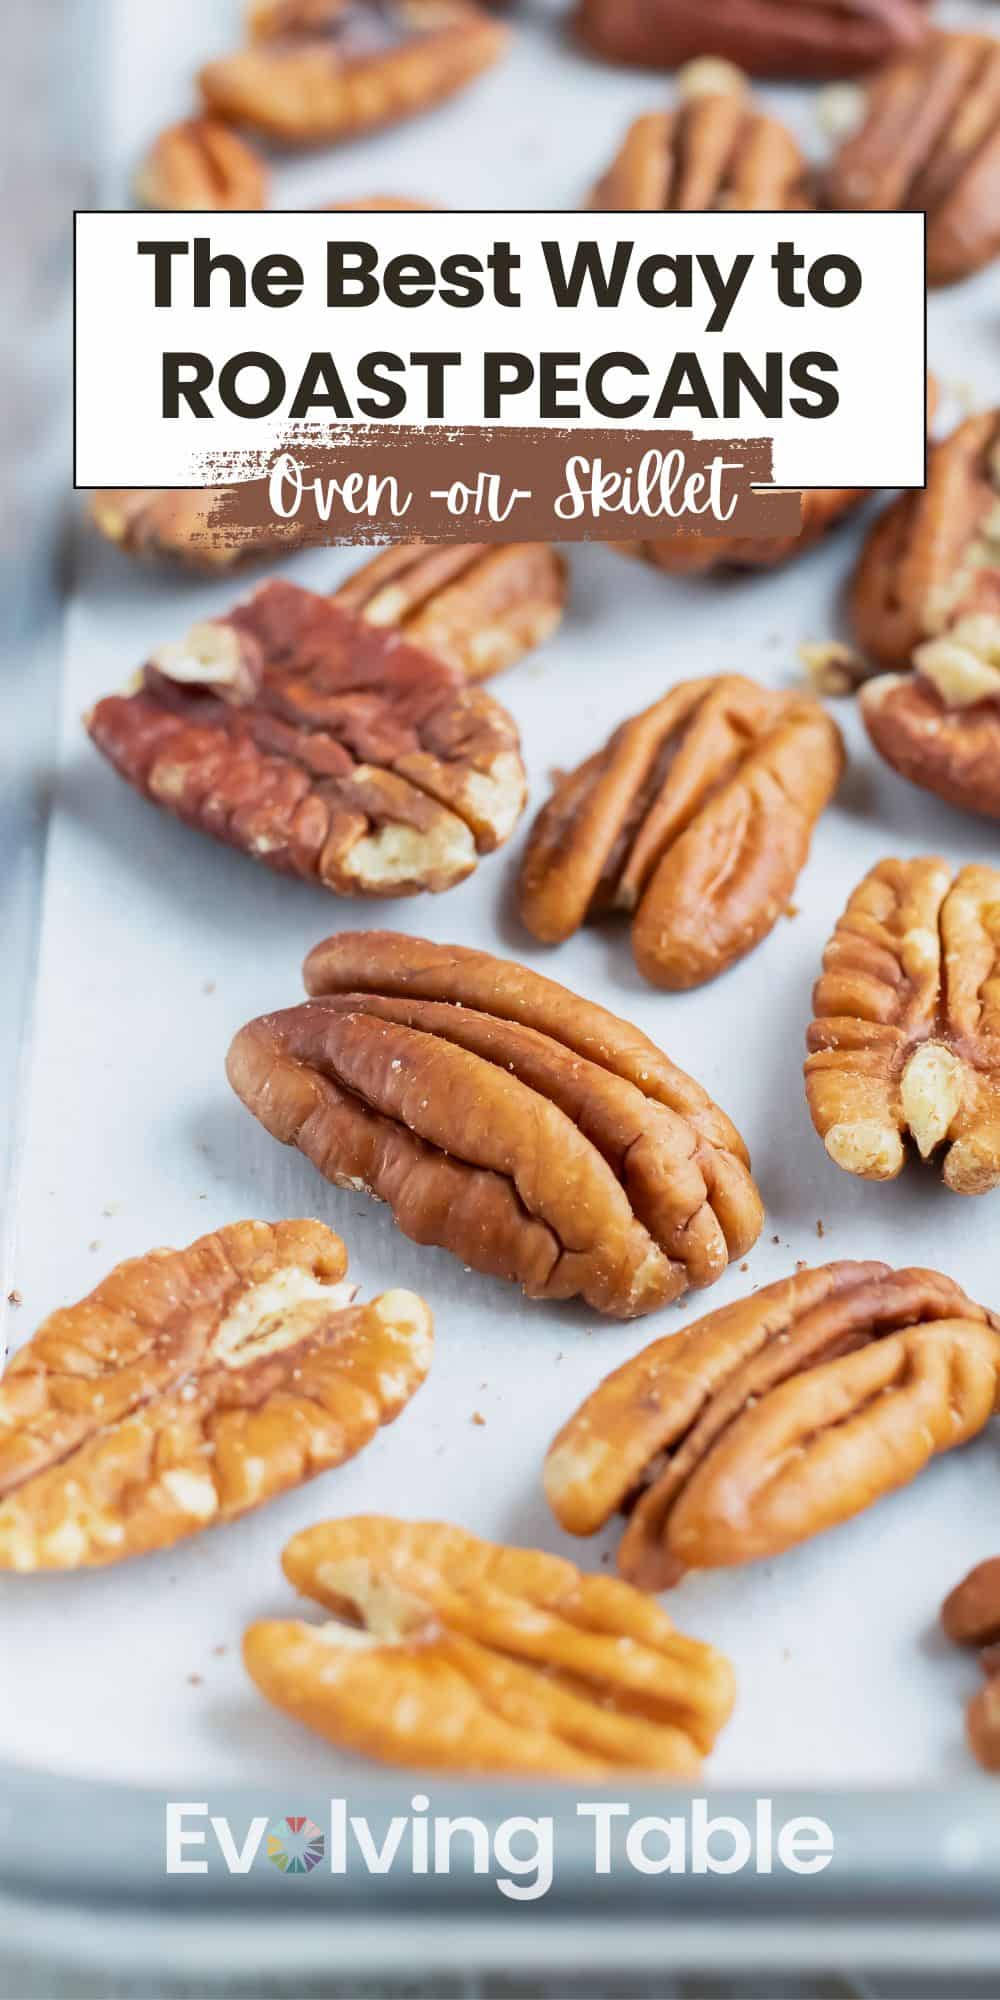 Roasted pecans on a sheet pan that were baked in an oven.